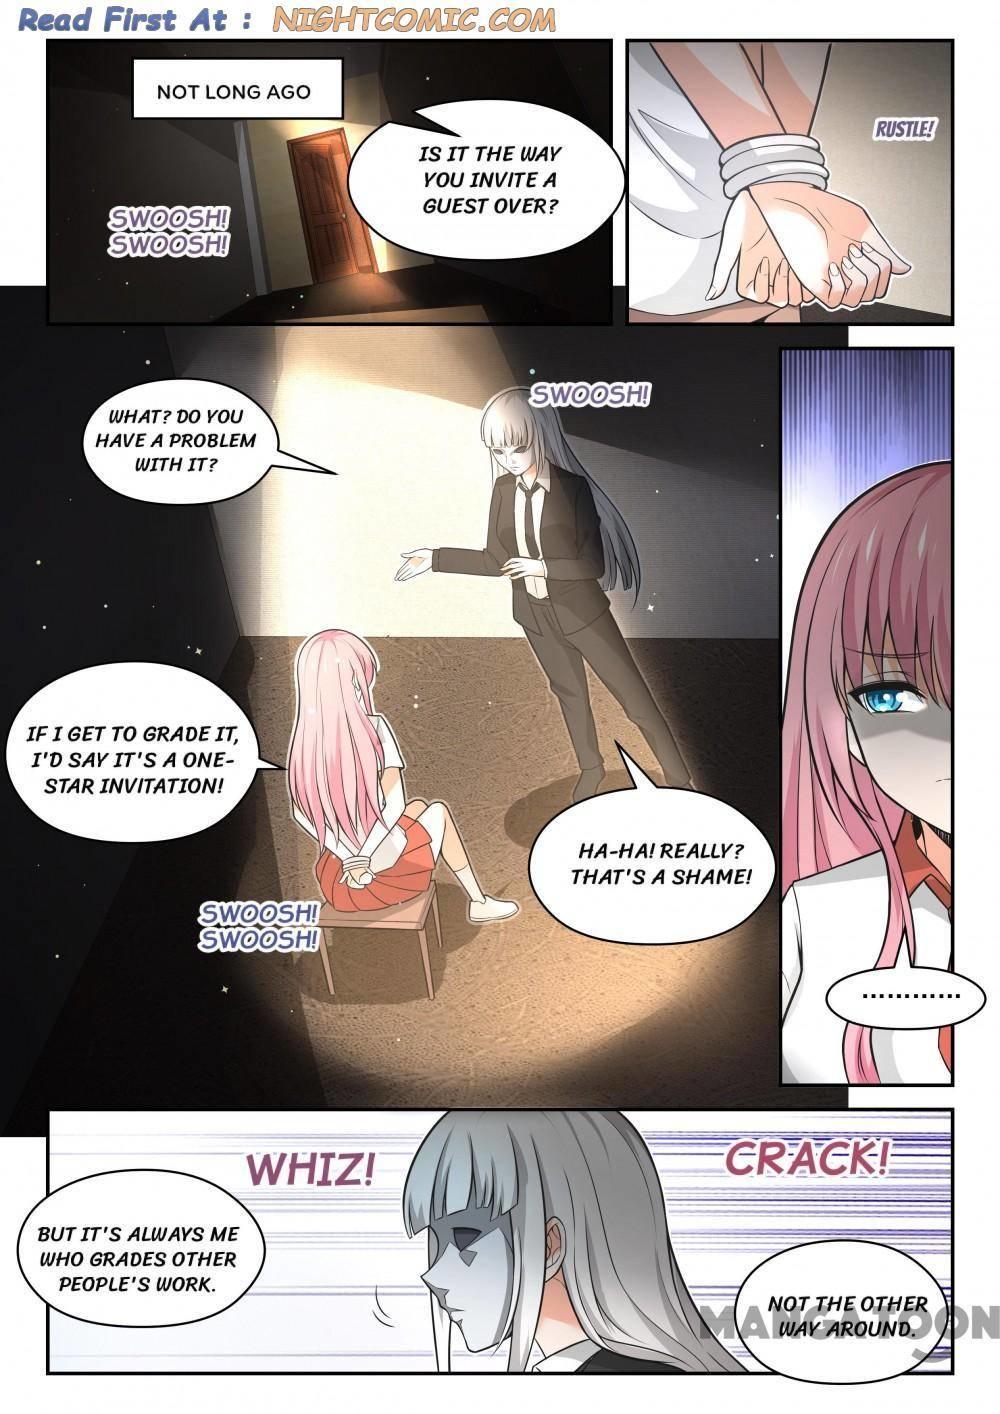 The Boy In The All-Girls School Chapter 472 page 1 - Mangakakalot